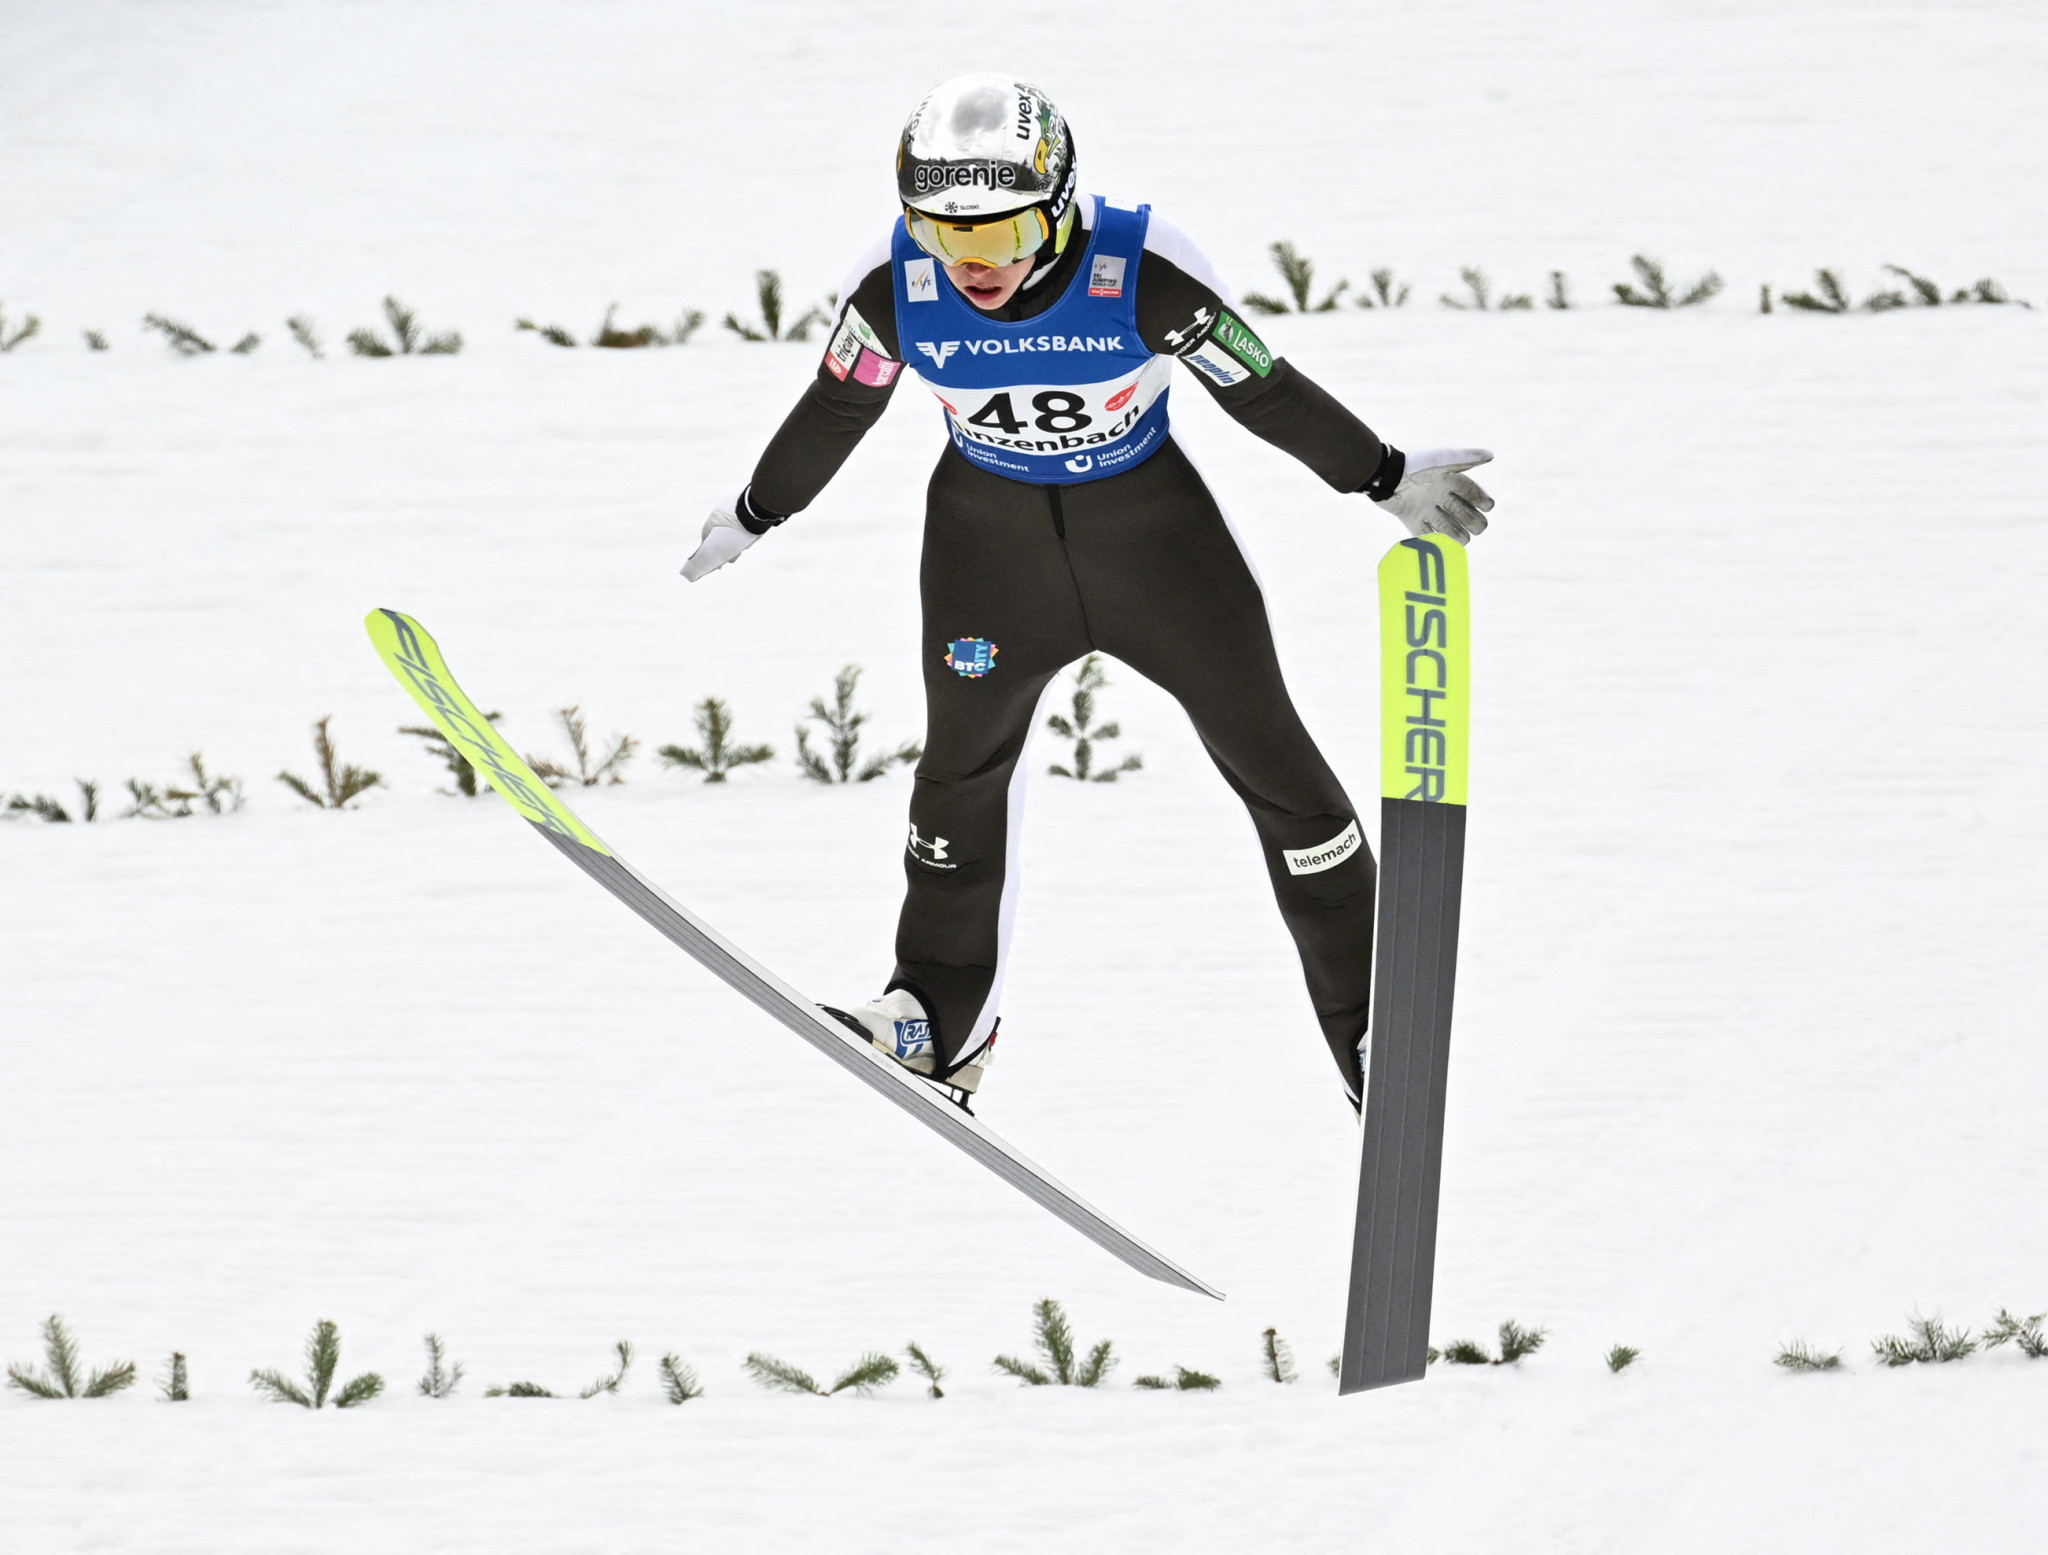 Slovenia claim one-two at Women’s Ski Jumping World Cup in Hinzenbach